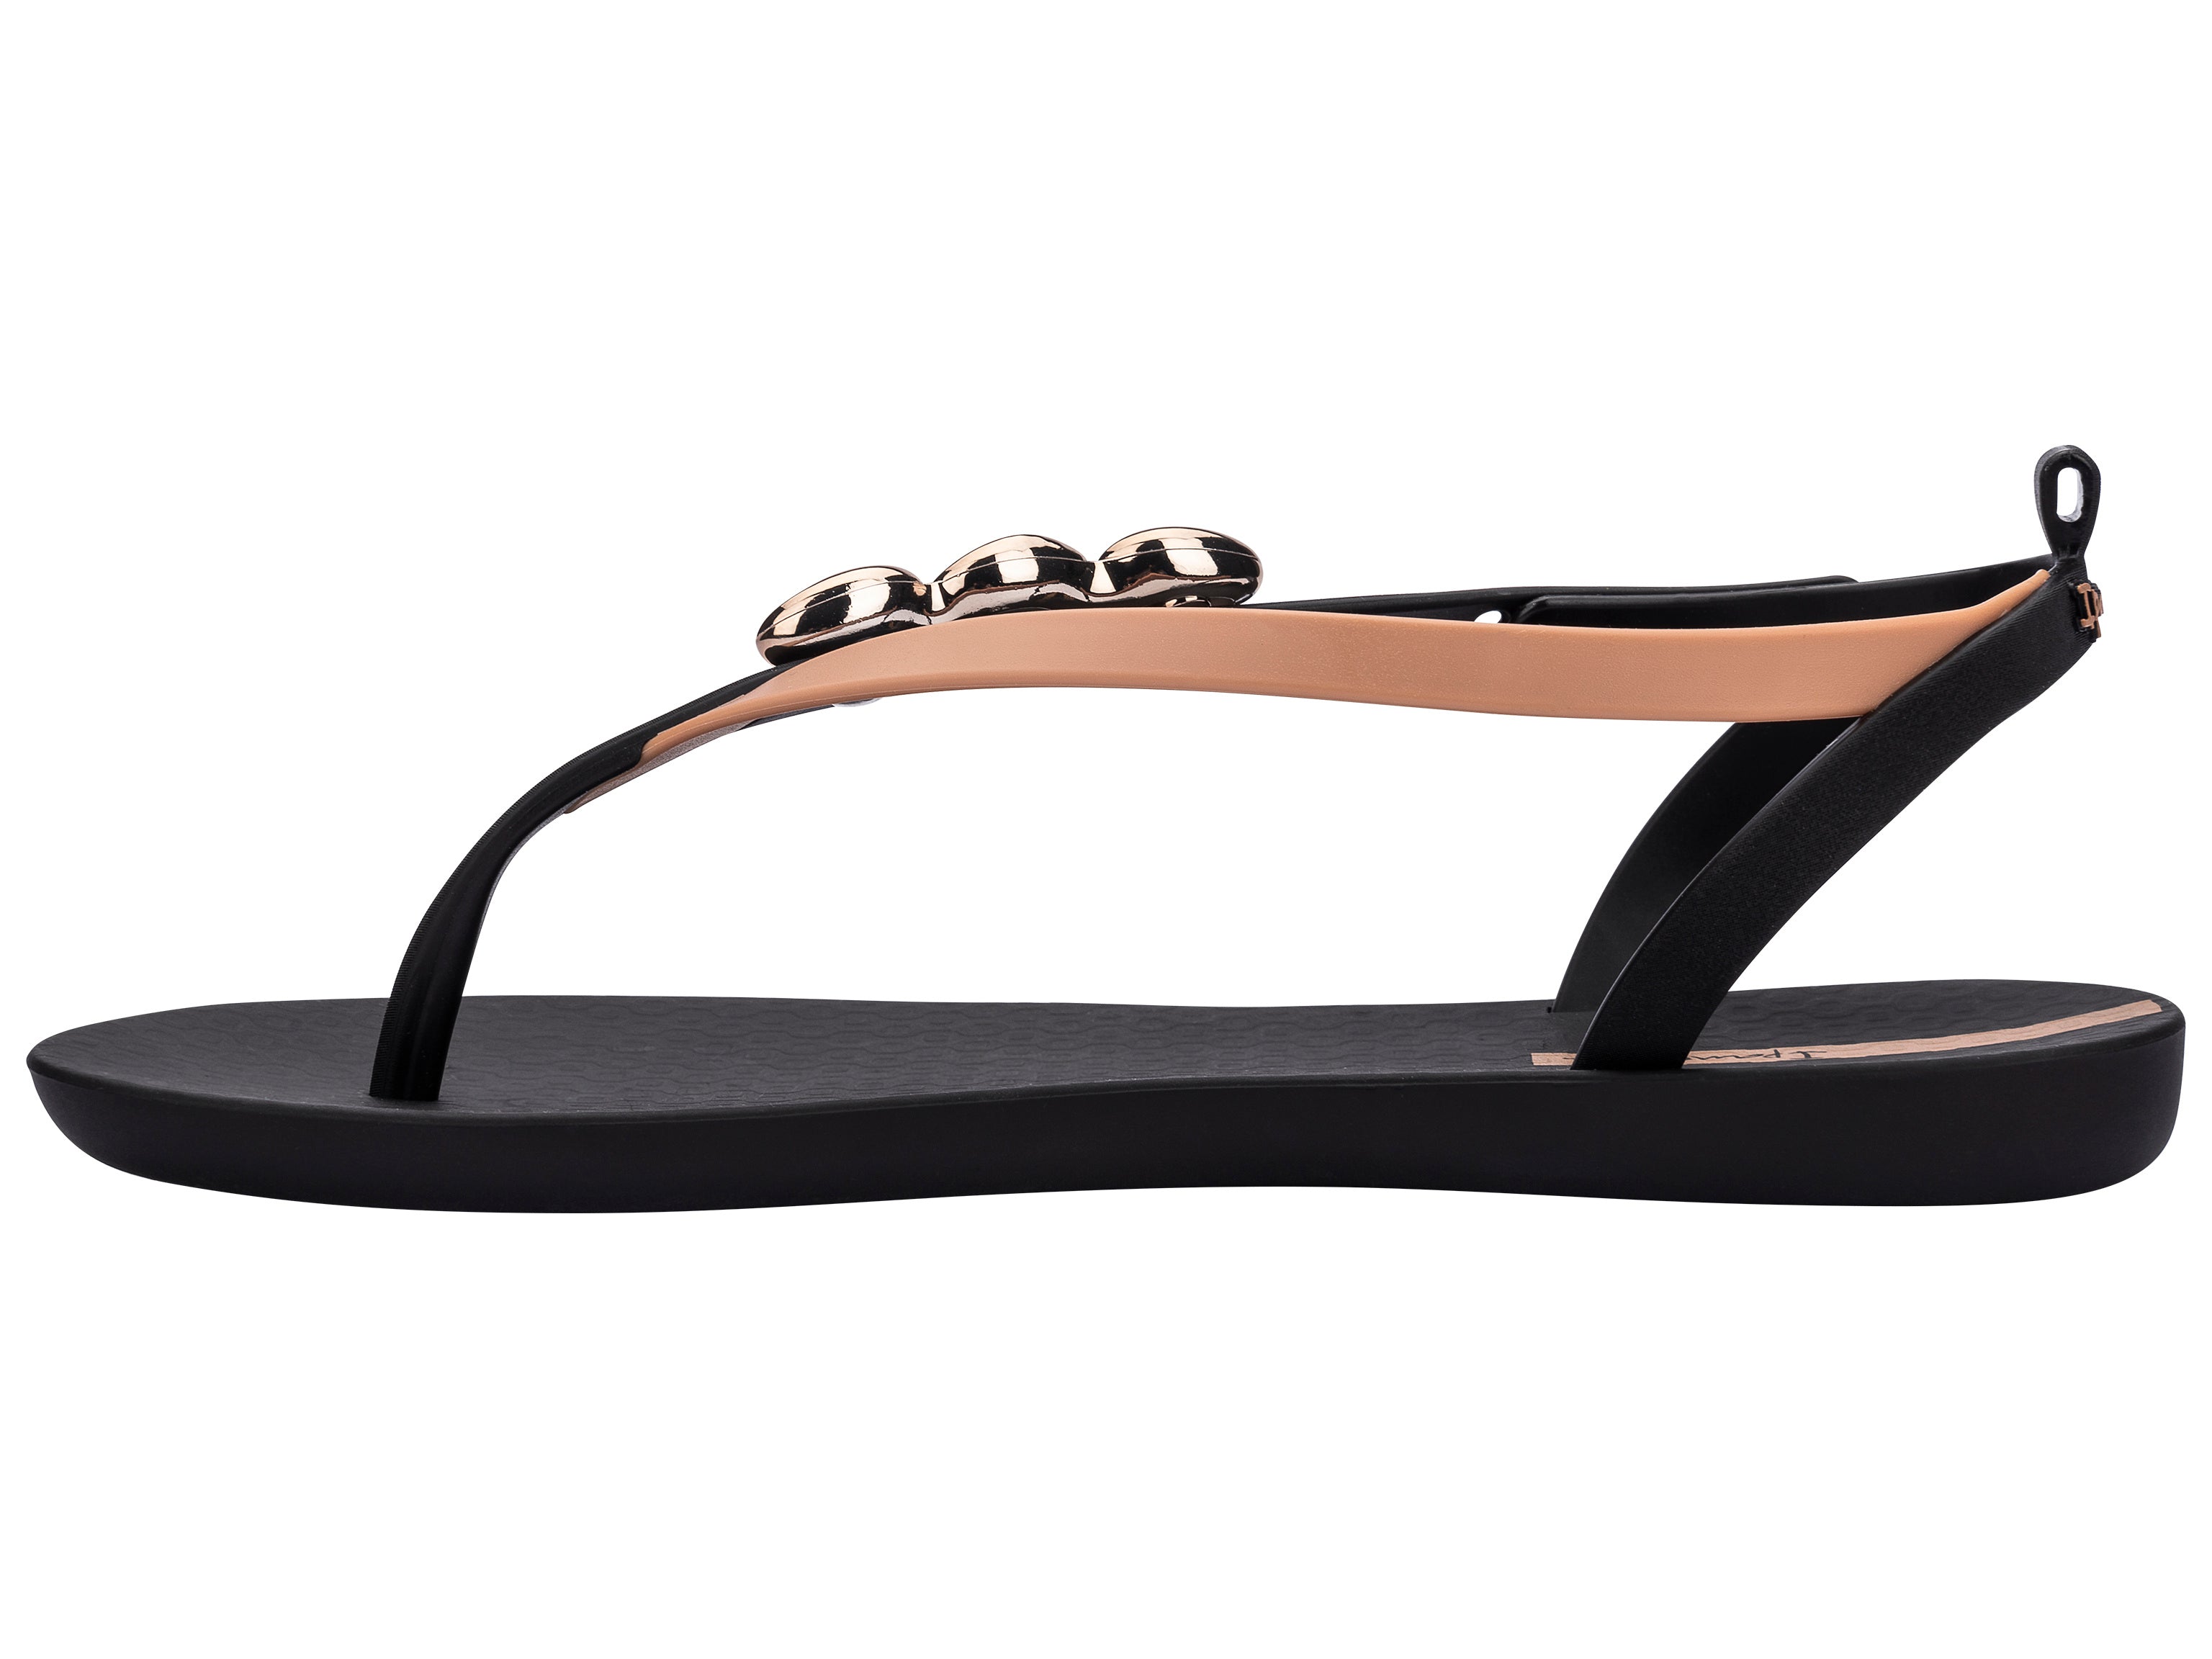 Inner side view of a black Ipanema Salty women's sandal with 3 gold shells on the strap.